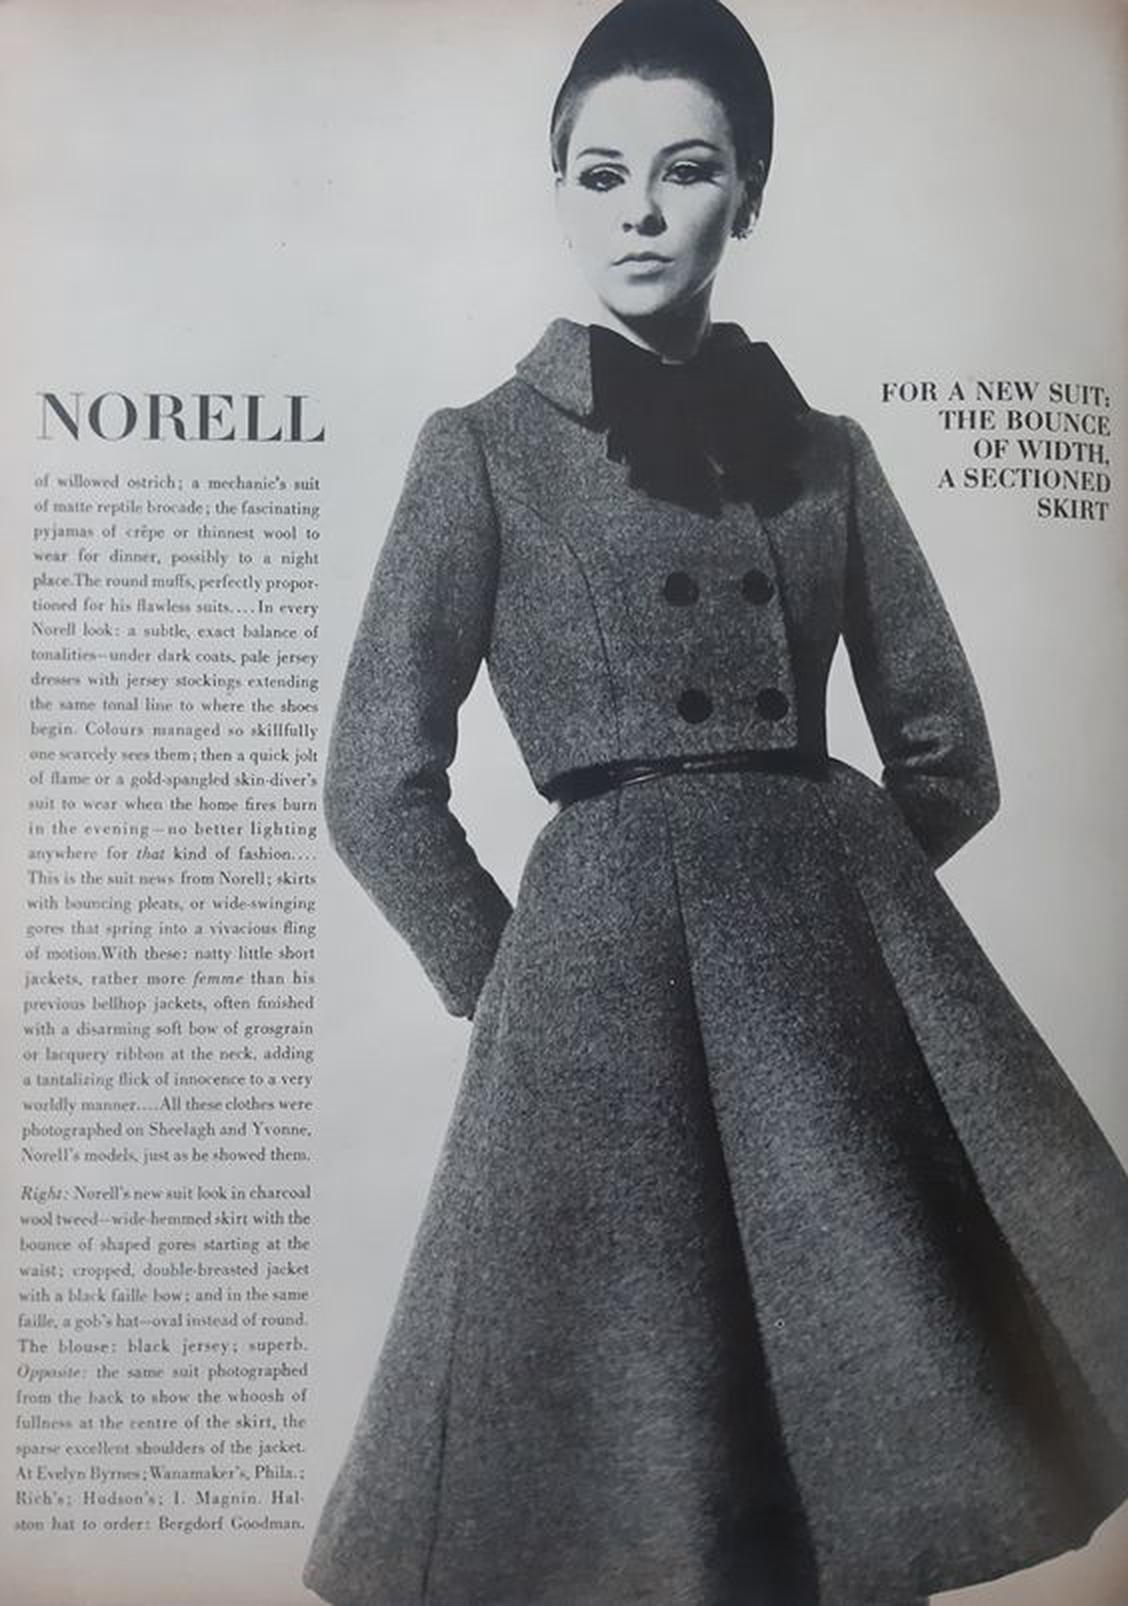 This timeless Norman Norell designer dress set, in the chicest charcoal-gray and black color combination, exemplifies his signature blend of couture-level quality with quintessentially American style. This gorgeous ensemble, dating back to his 1964